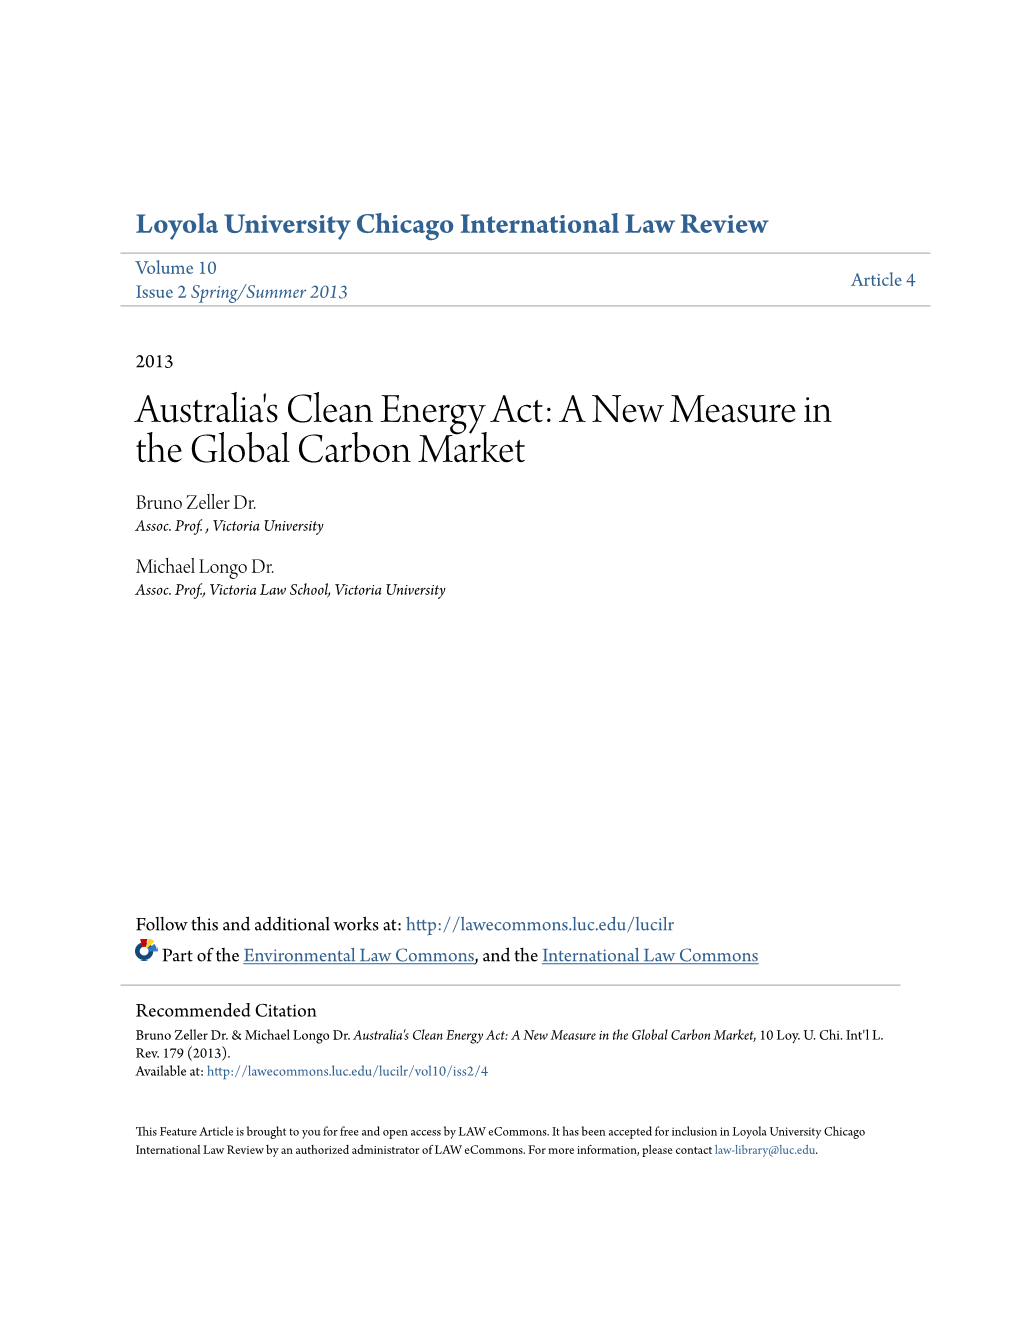 Australia's Clean Energy Act: a New Measure in the Global Carbon Market Bruno Zeller Dr